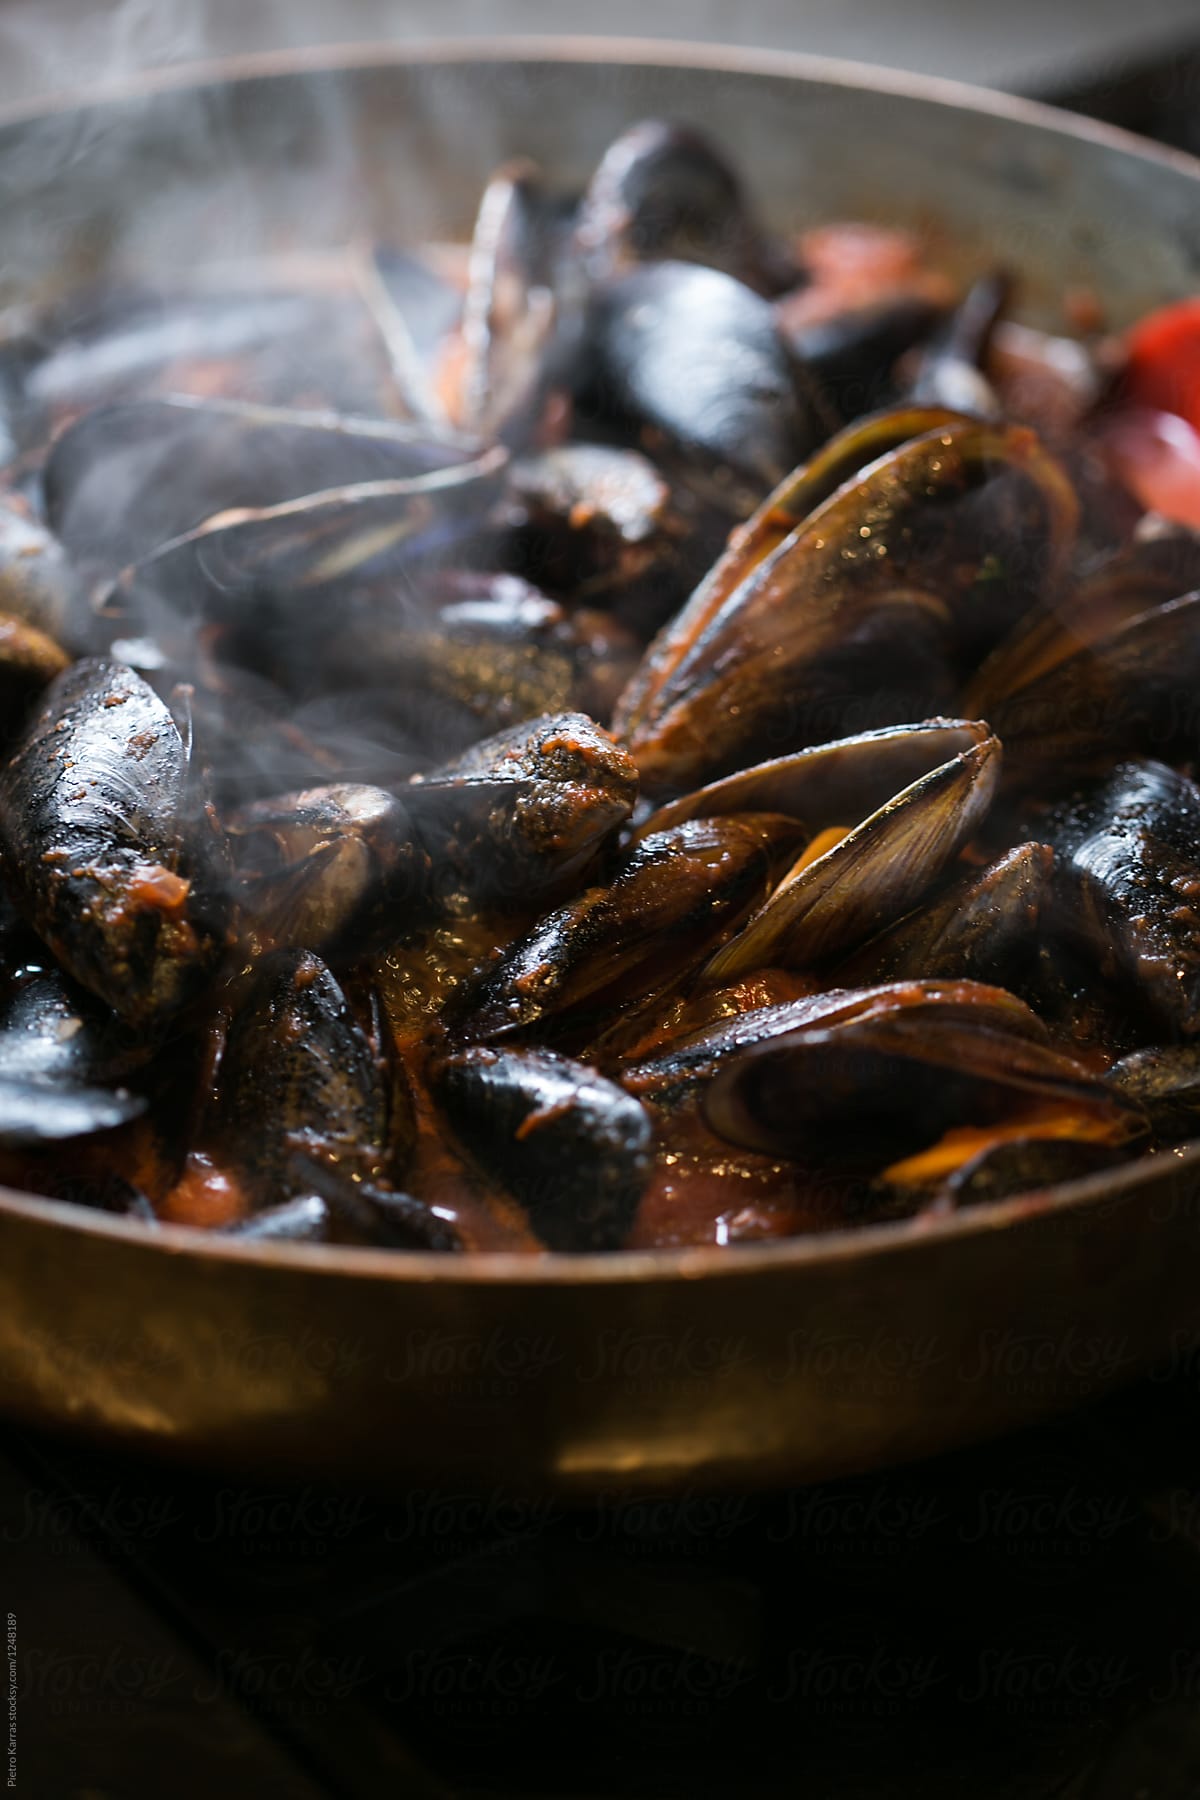 A pan with mussels